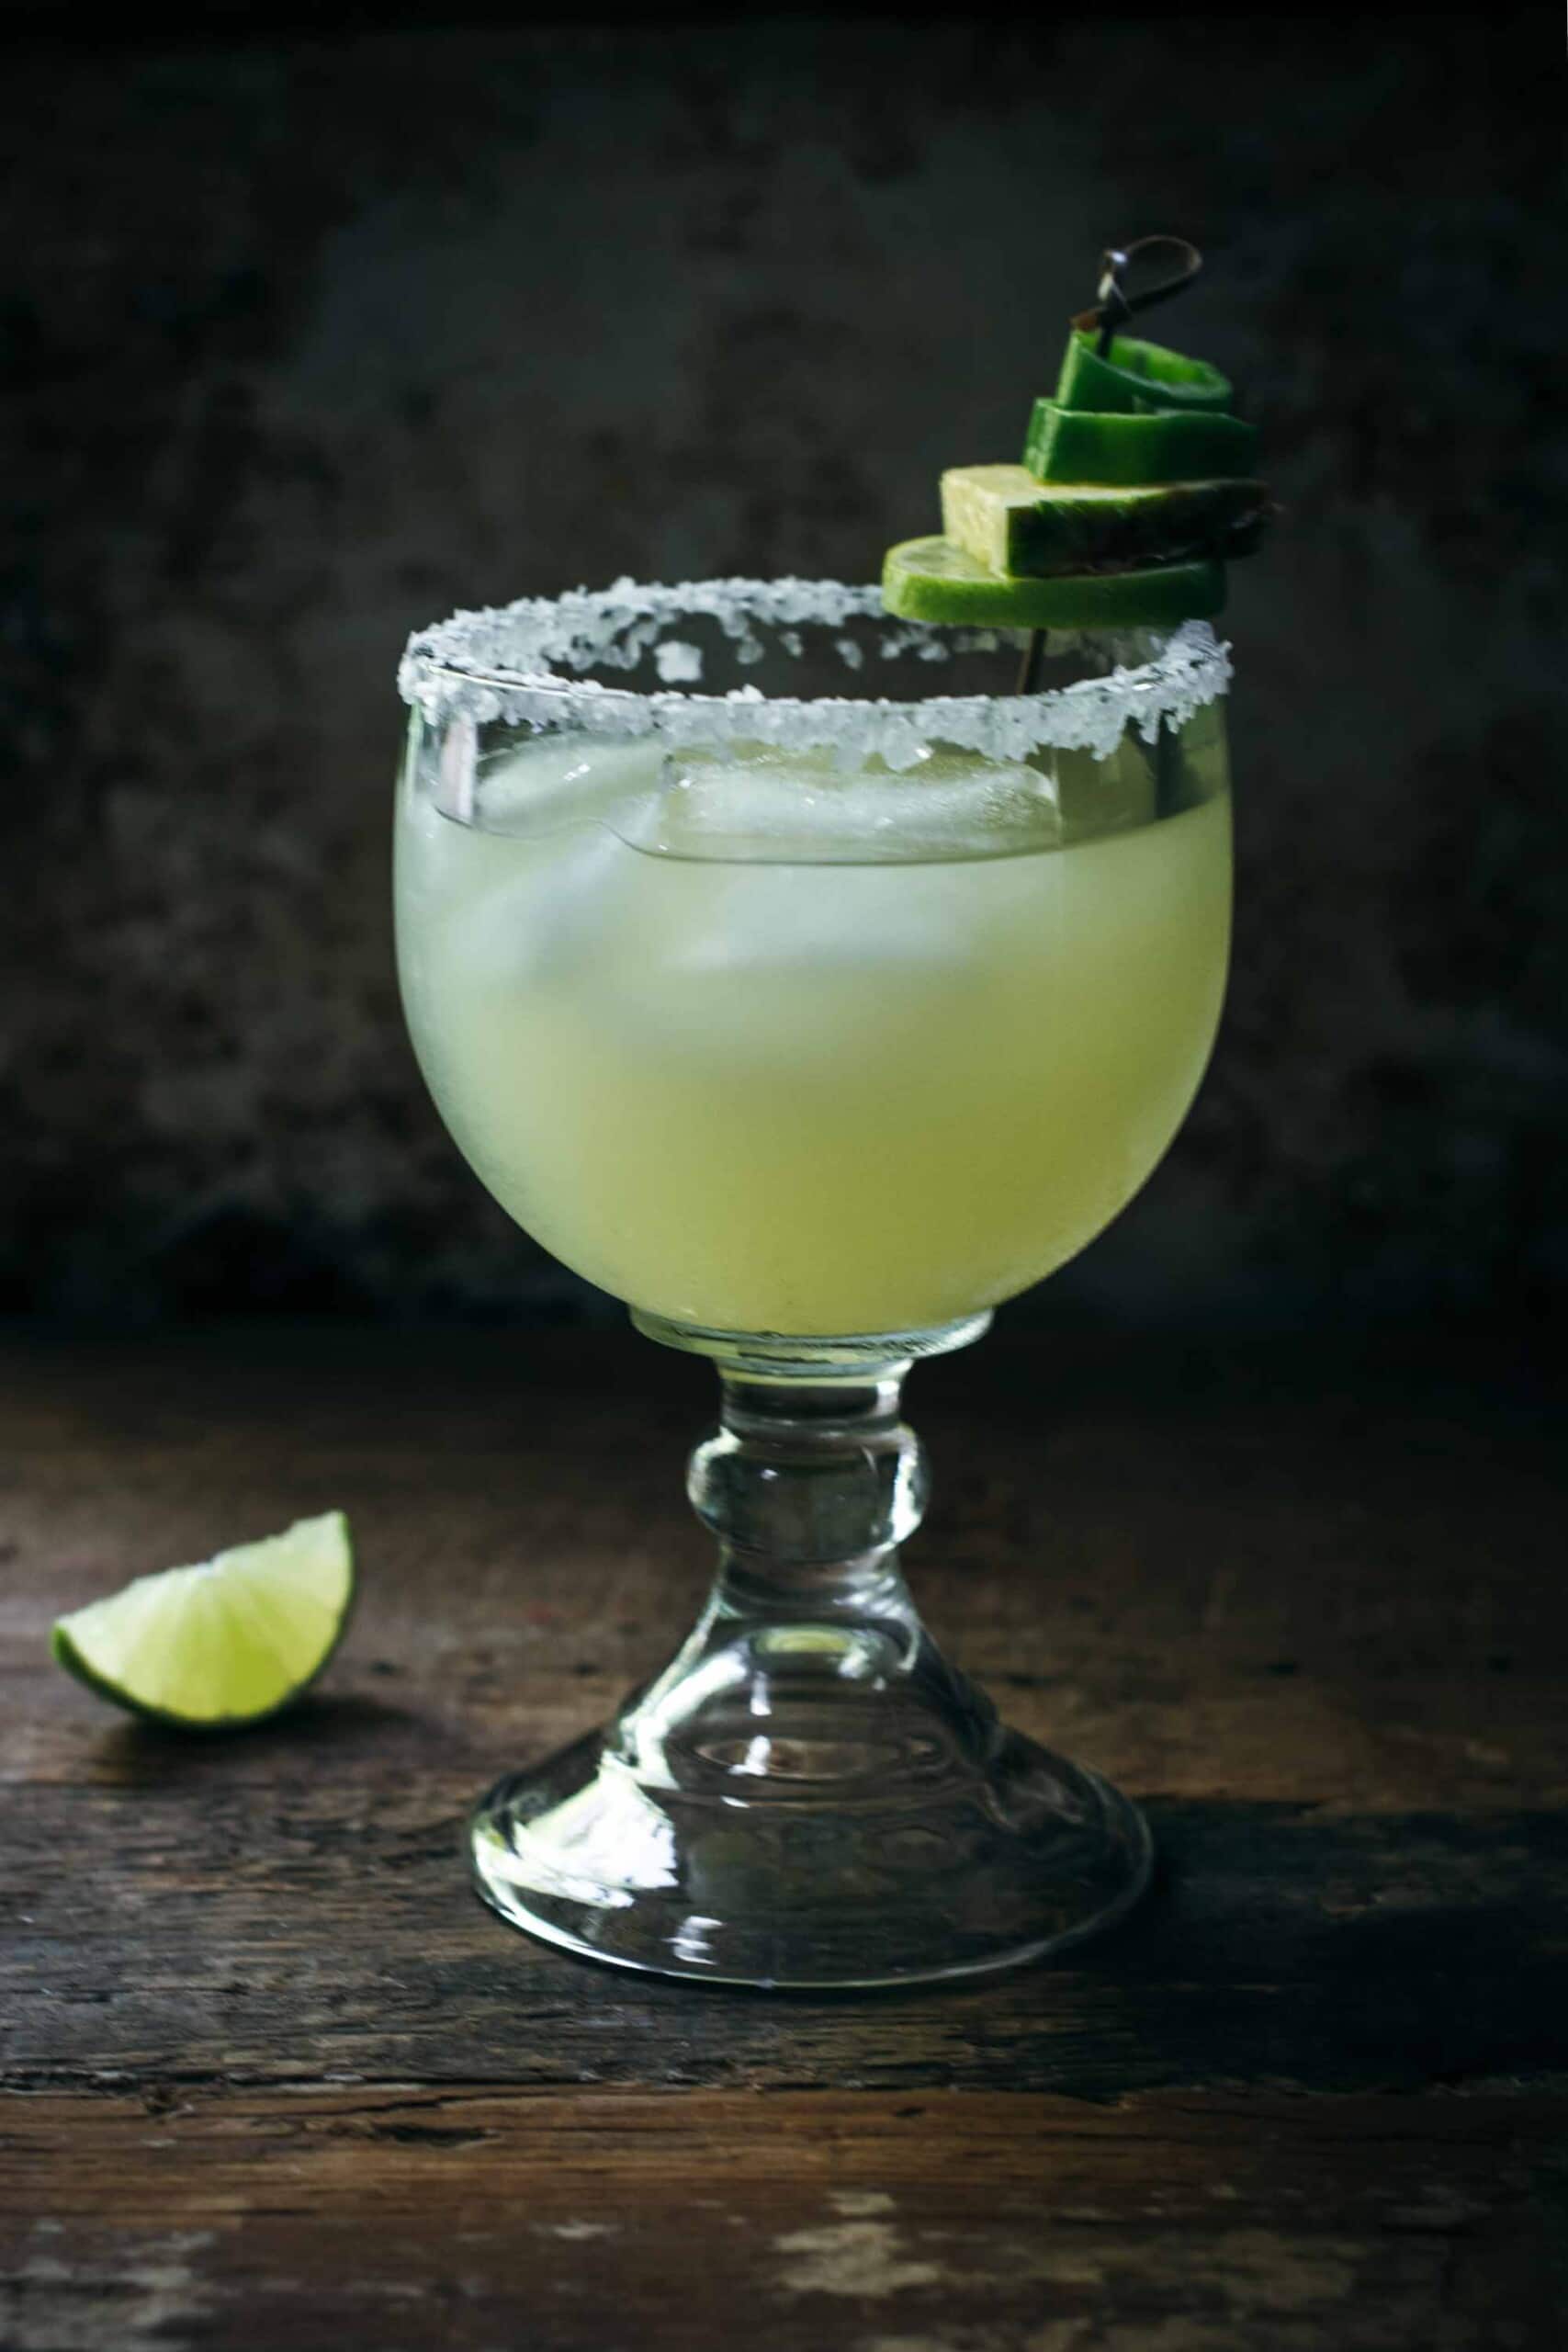 Hatch Chile Pineapple Margarita - alcoholic drinks that don't taste like alcohol